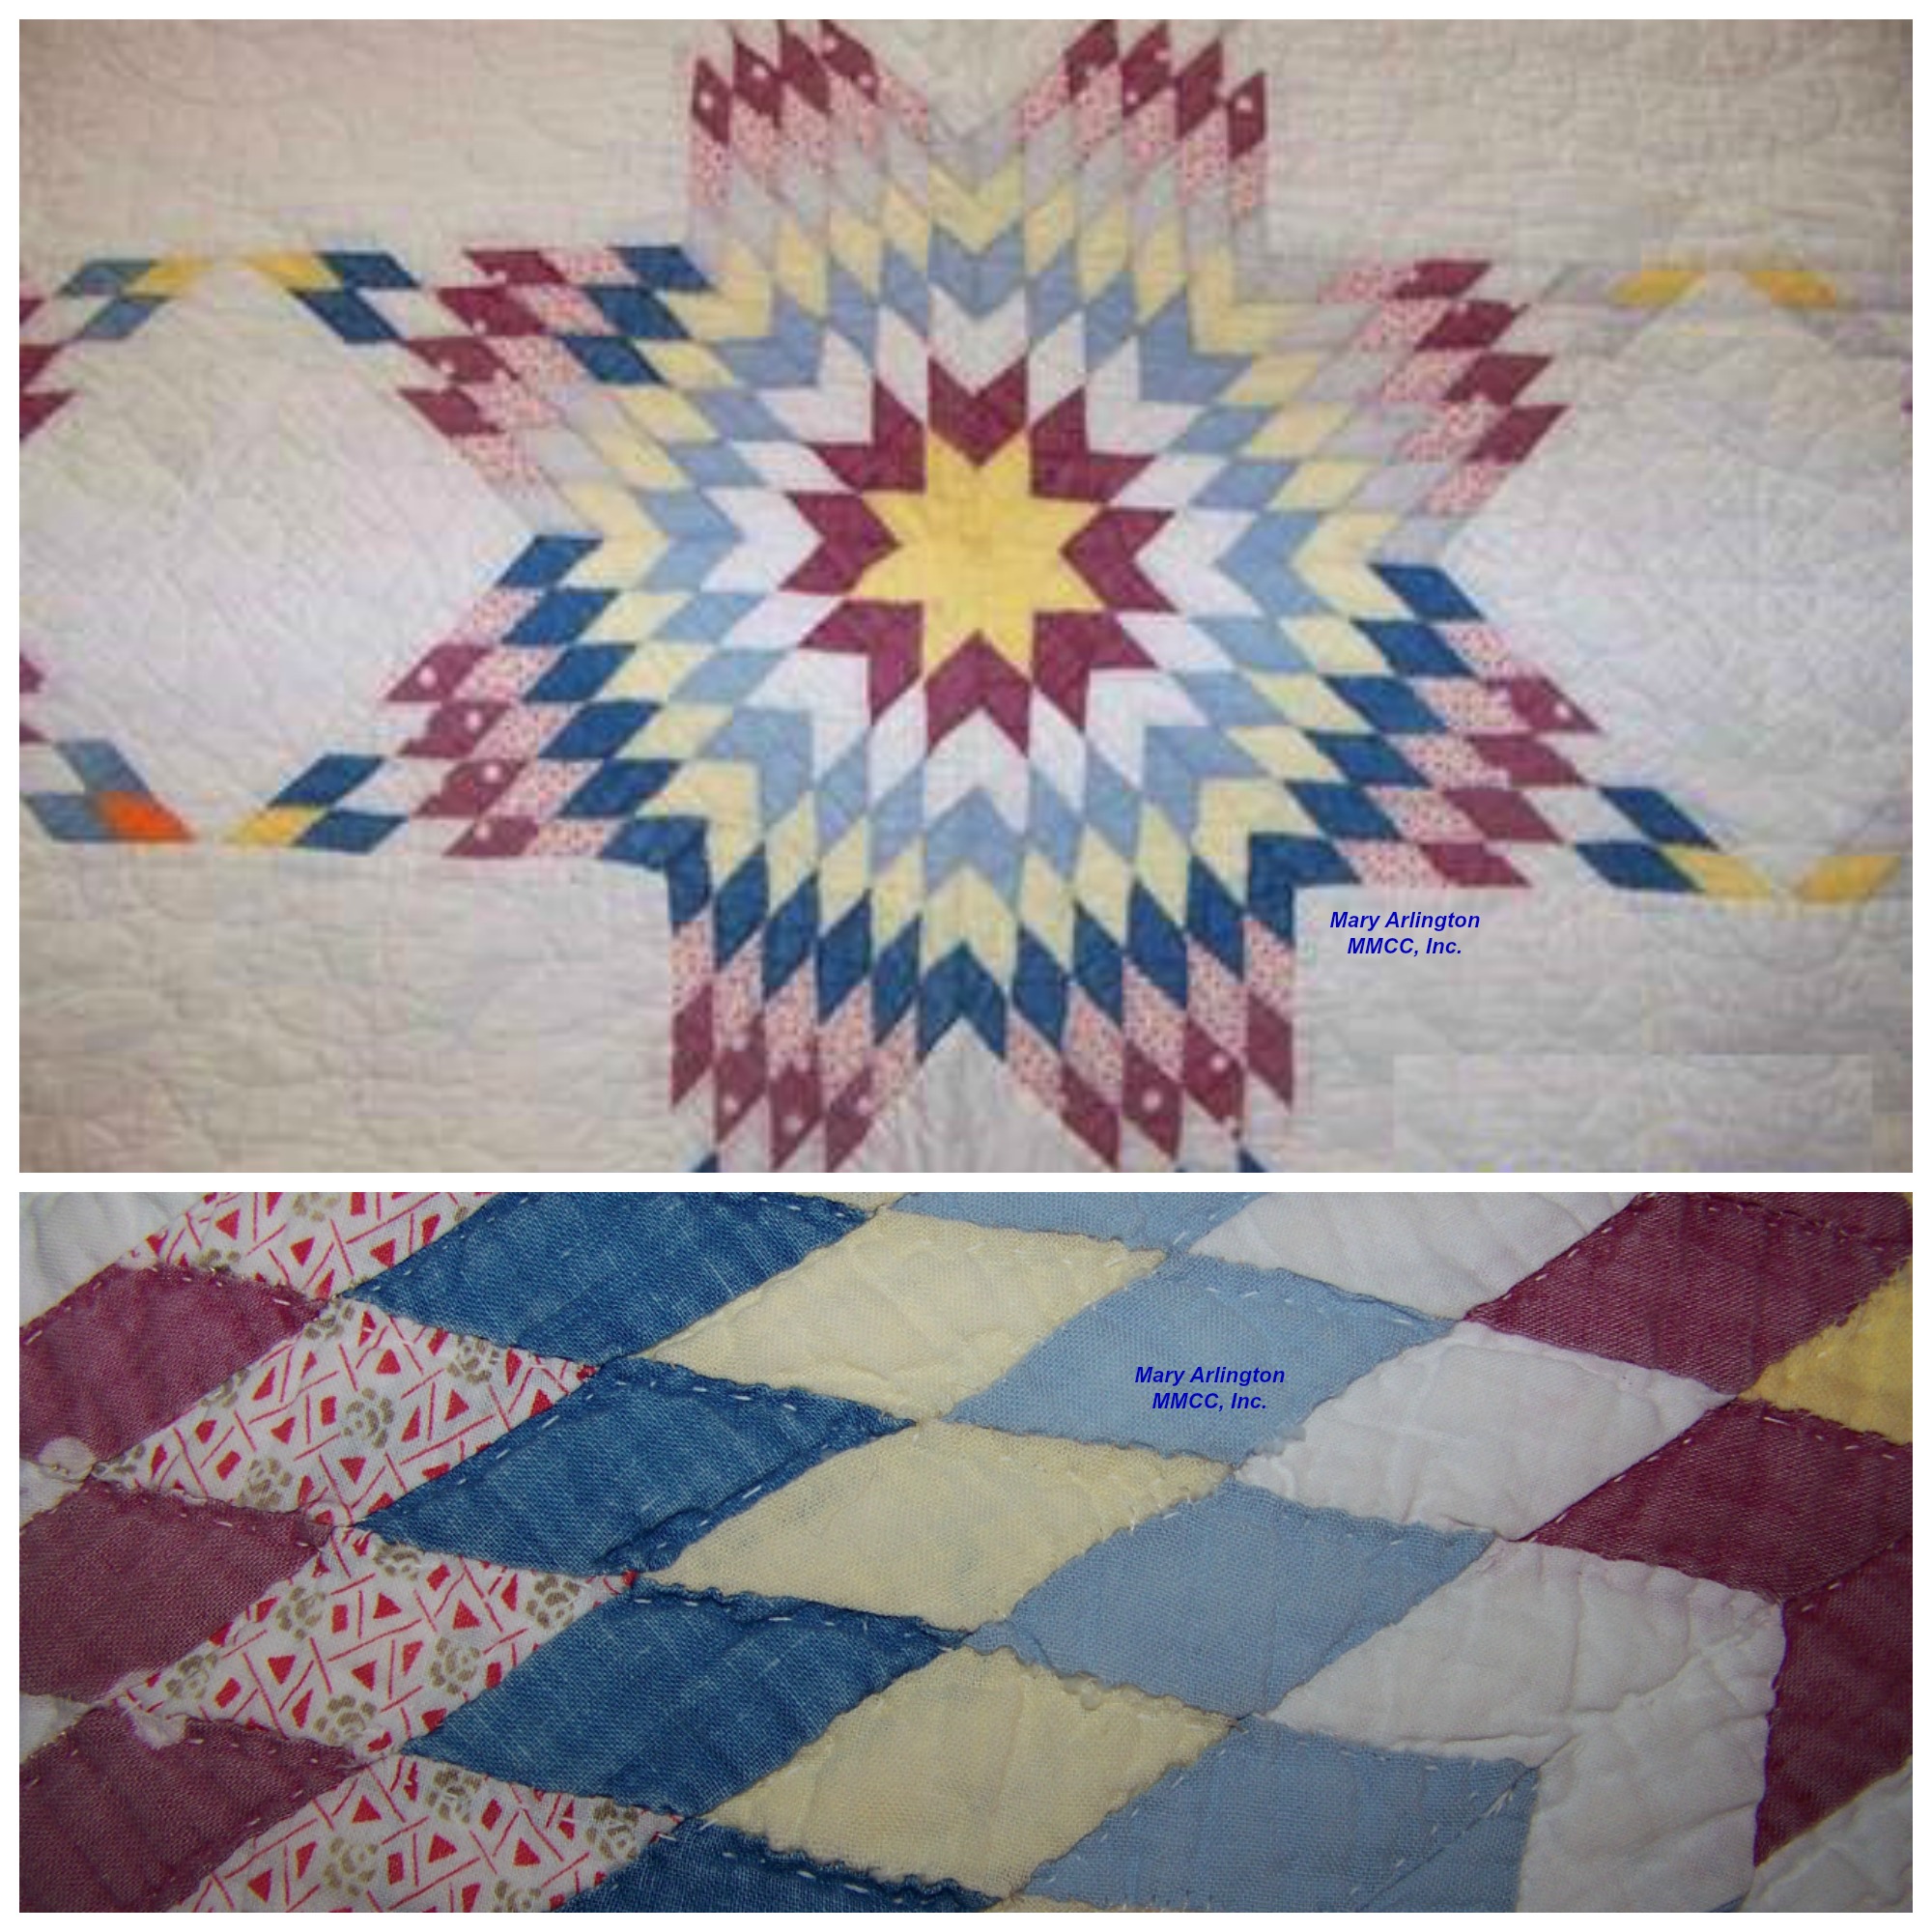 Quilt image by MMCC Inc and Mary Arlington